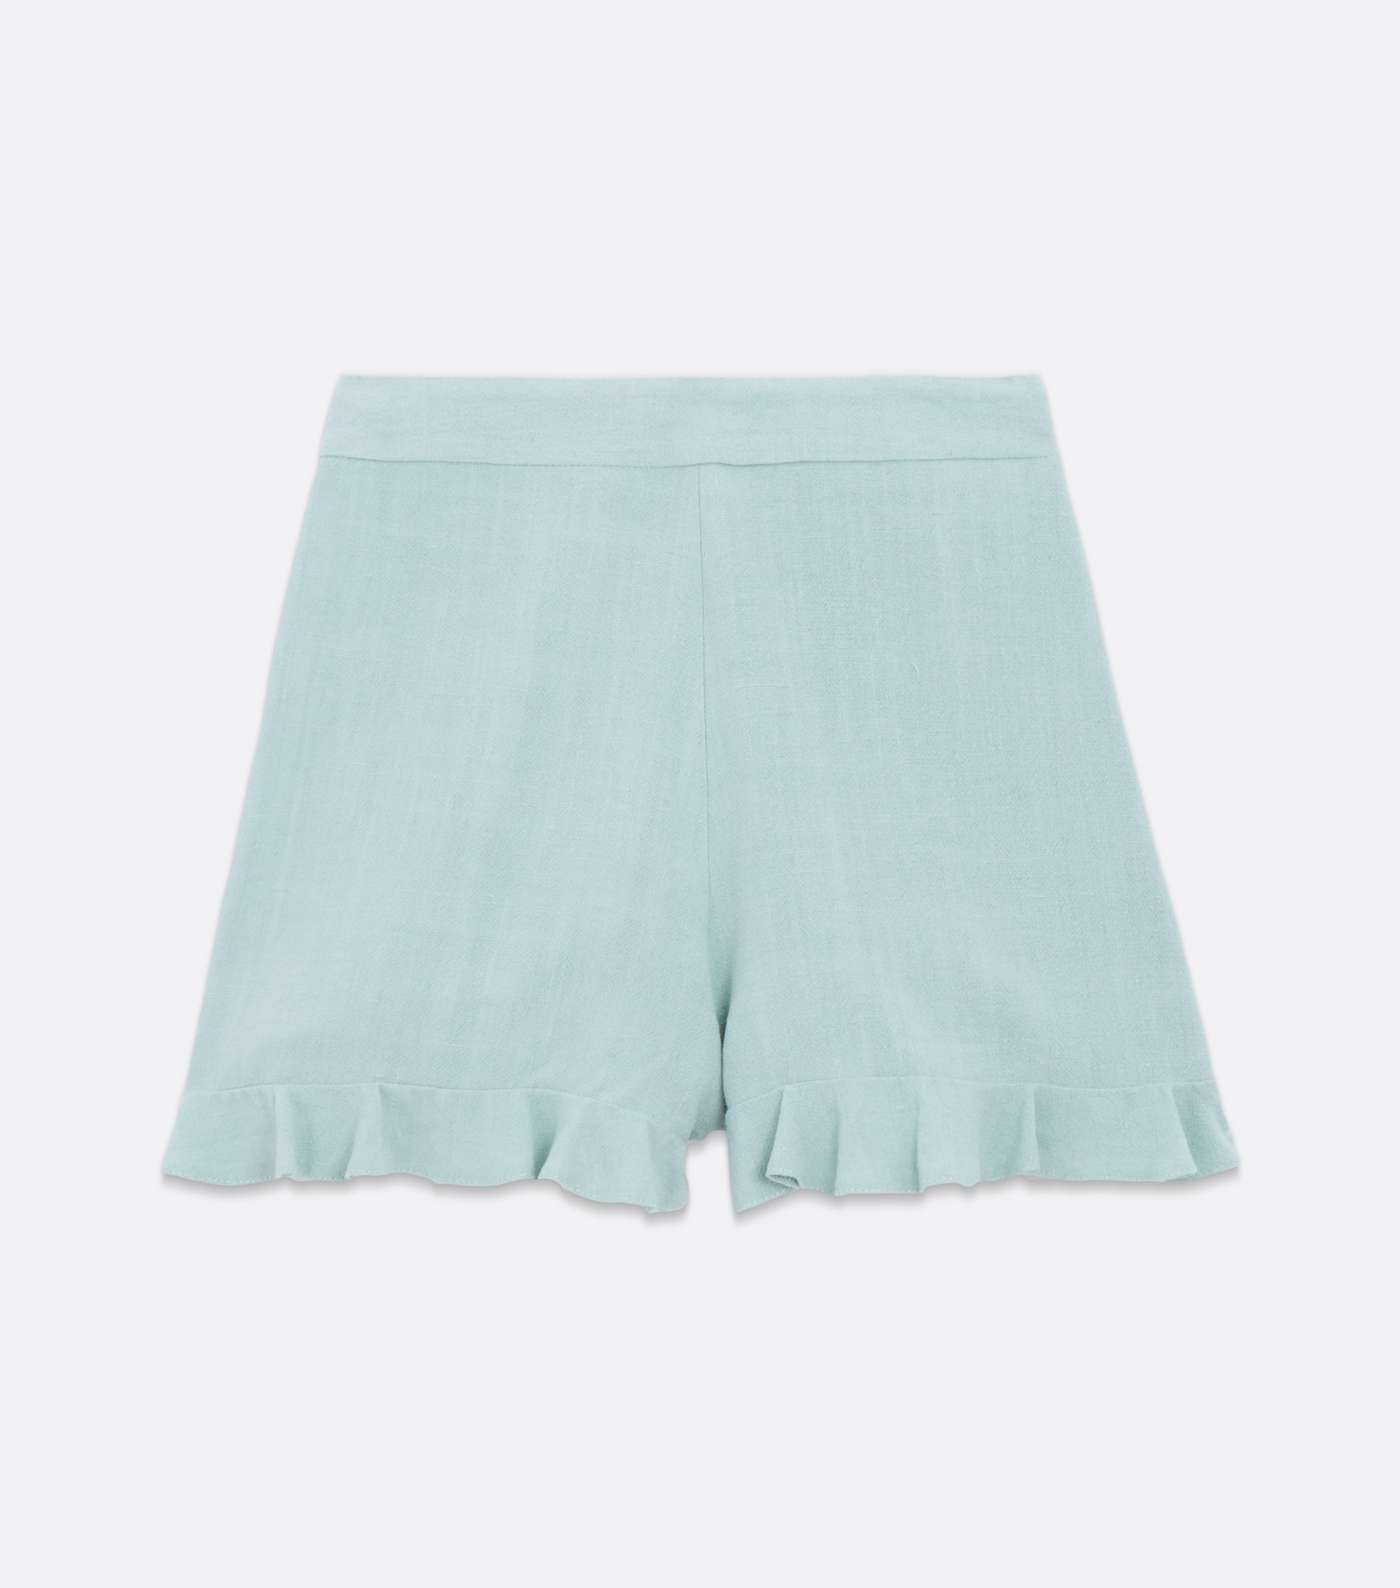 Pale Blue Linen Look Frill Shorts Image 5